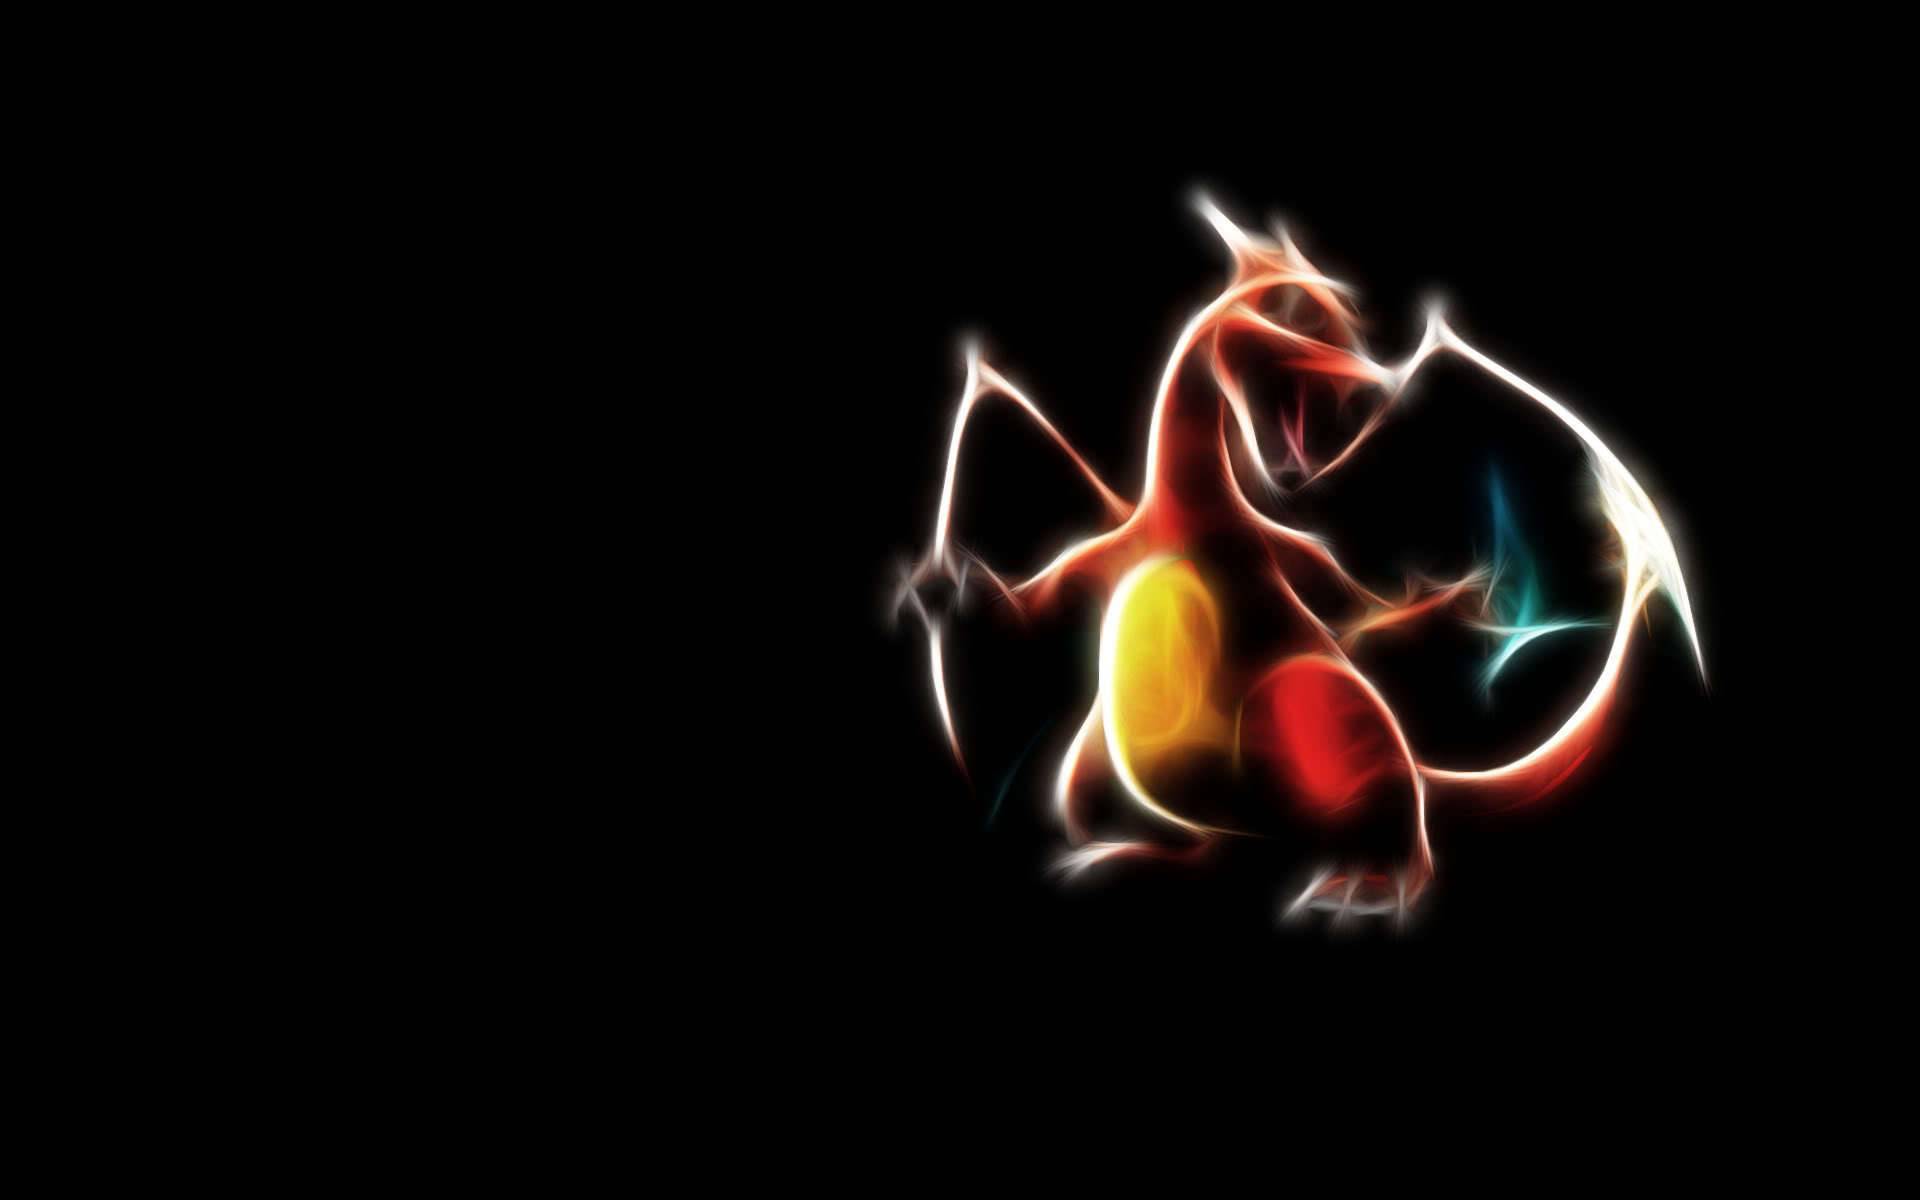 Charizard Images Shiny Charizard Wallpaper And Background - Shiny Charizard  Fan Art Transparent PNG - 500x500 - Free Download on NicePNG